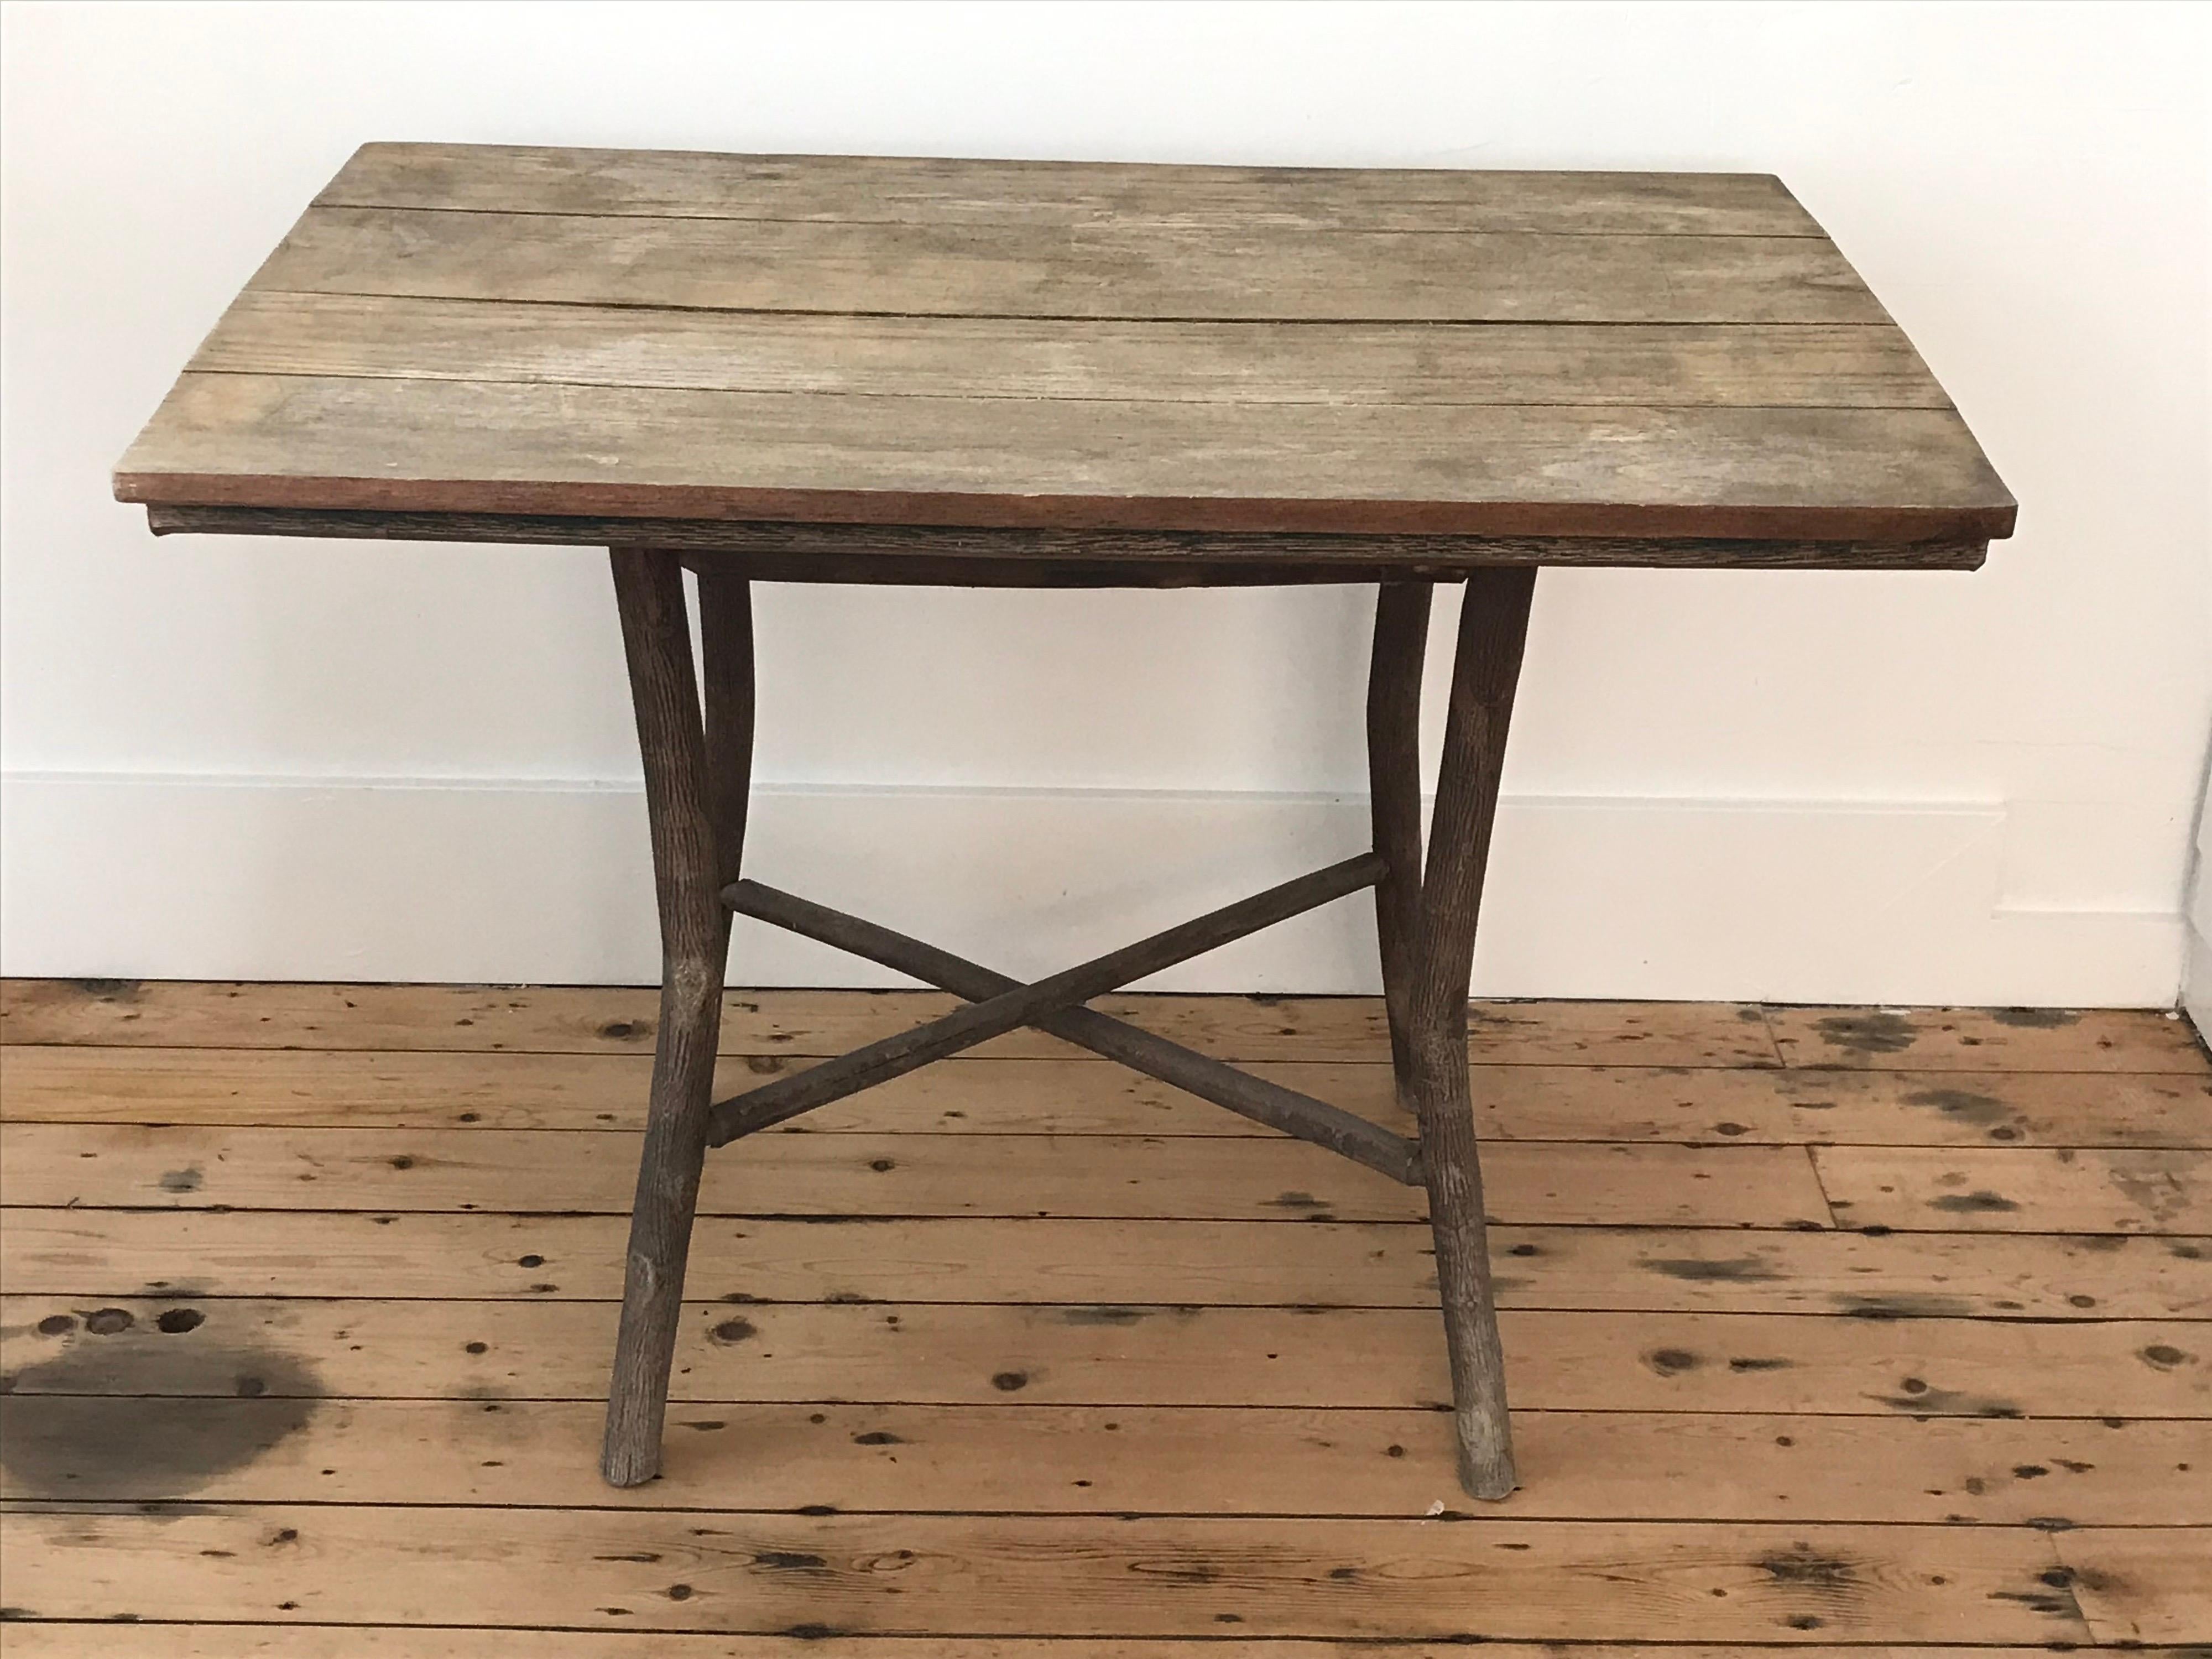 Early 20th Century rustic Folk Art American Adirondack camp table with open tree branch base and pine plank top.